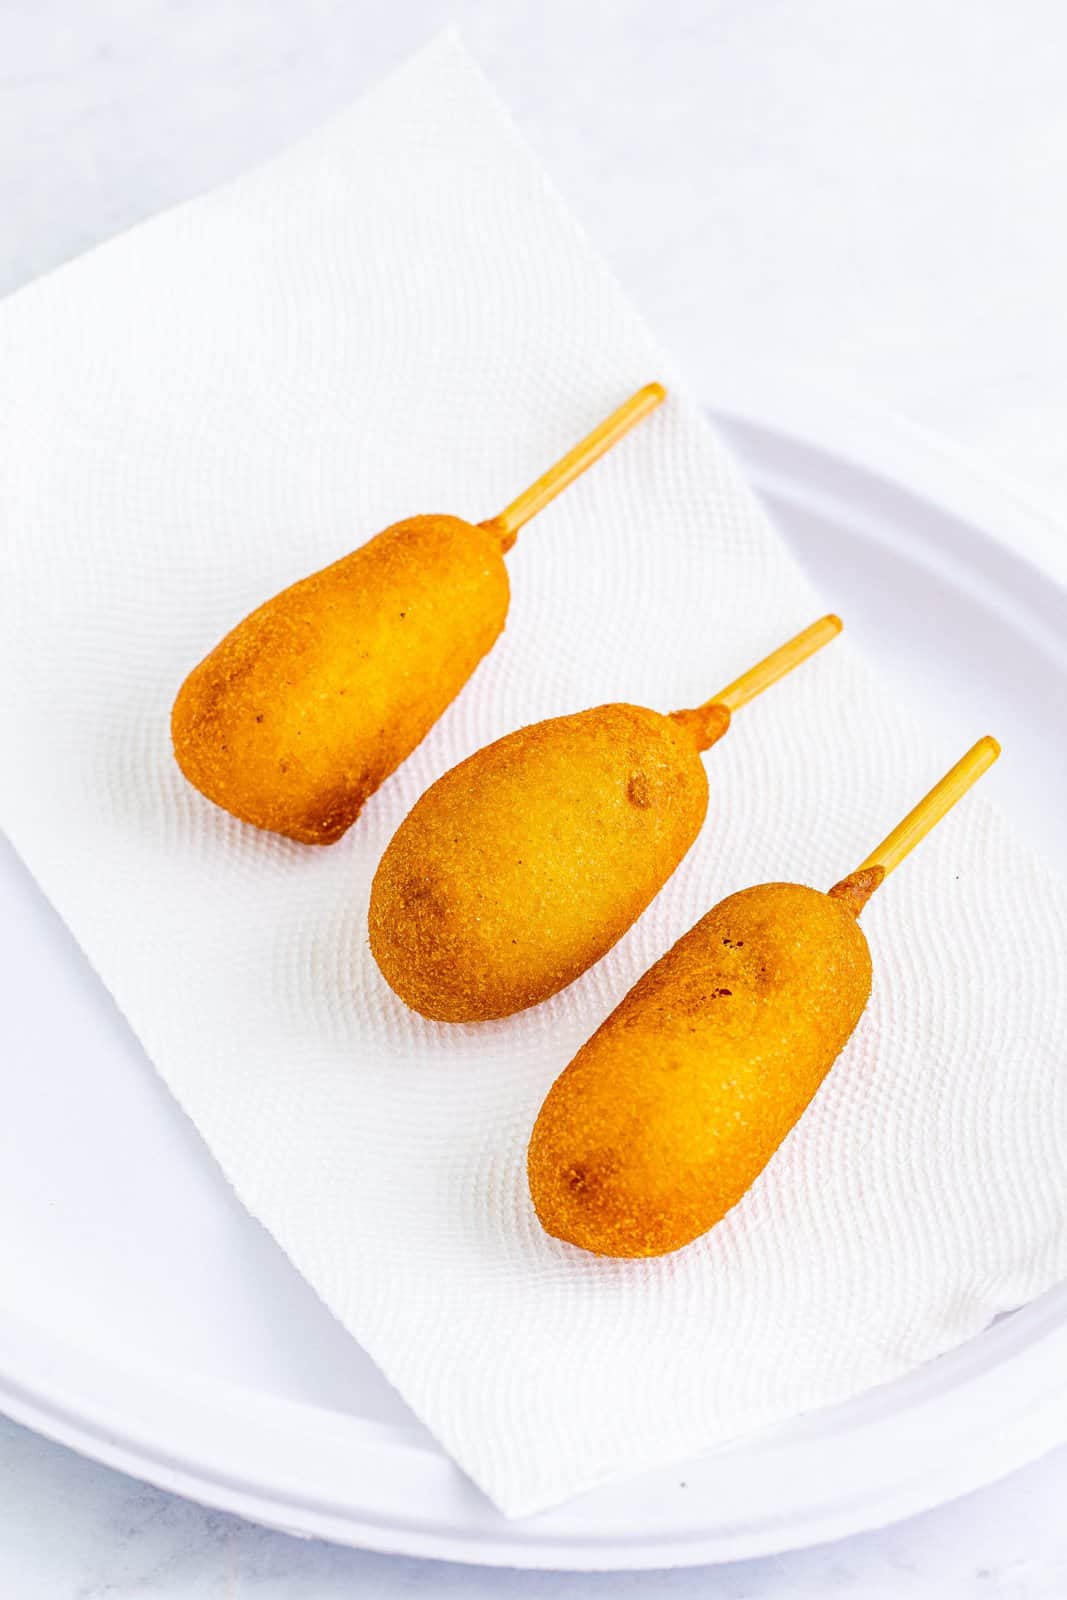 Corn Dogs draining on paper towels.